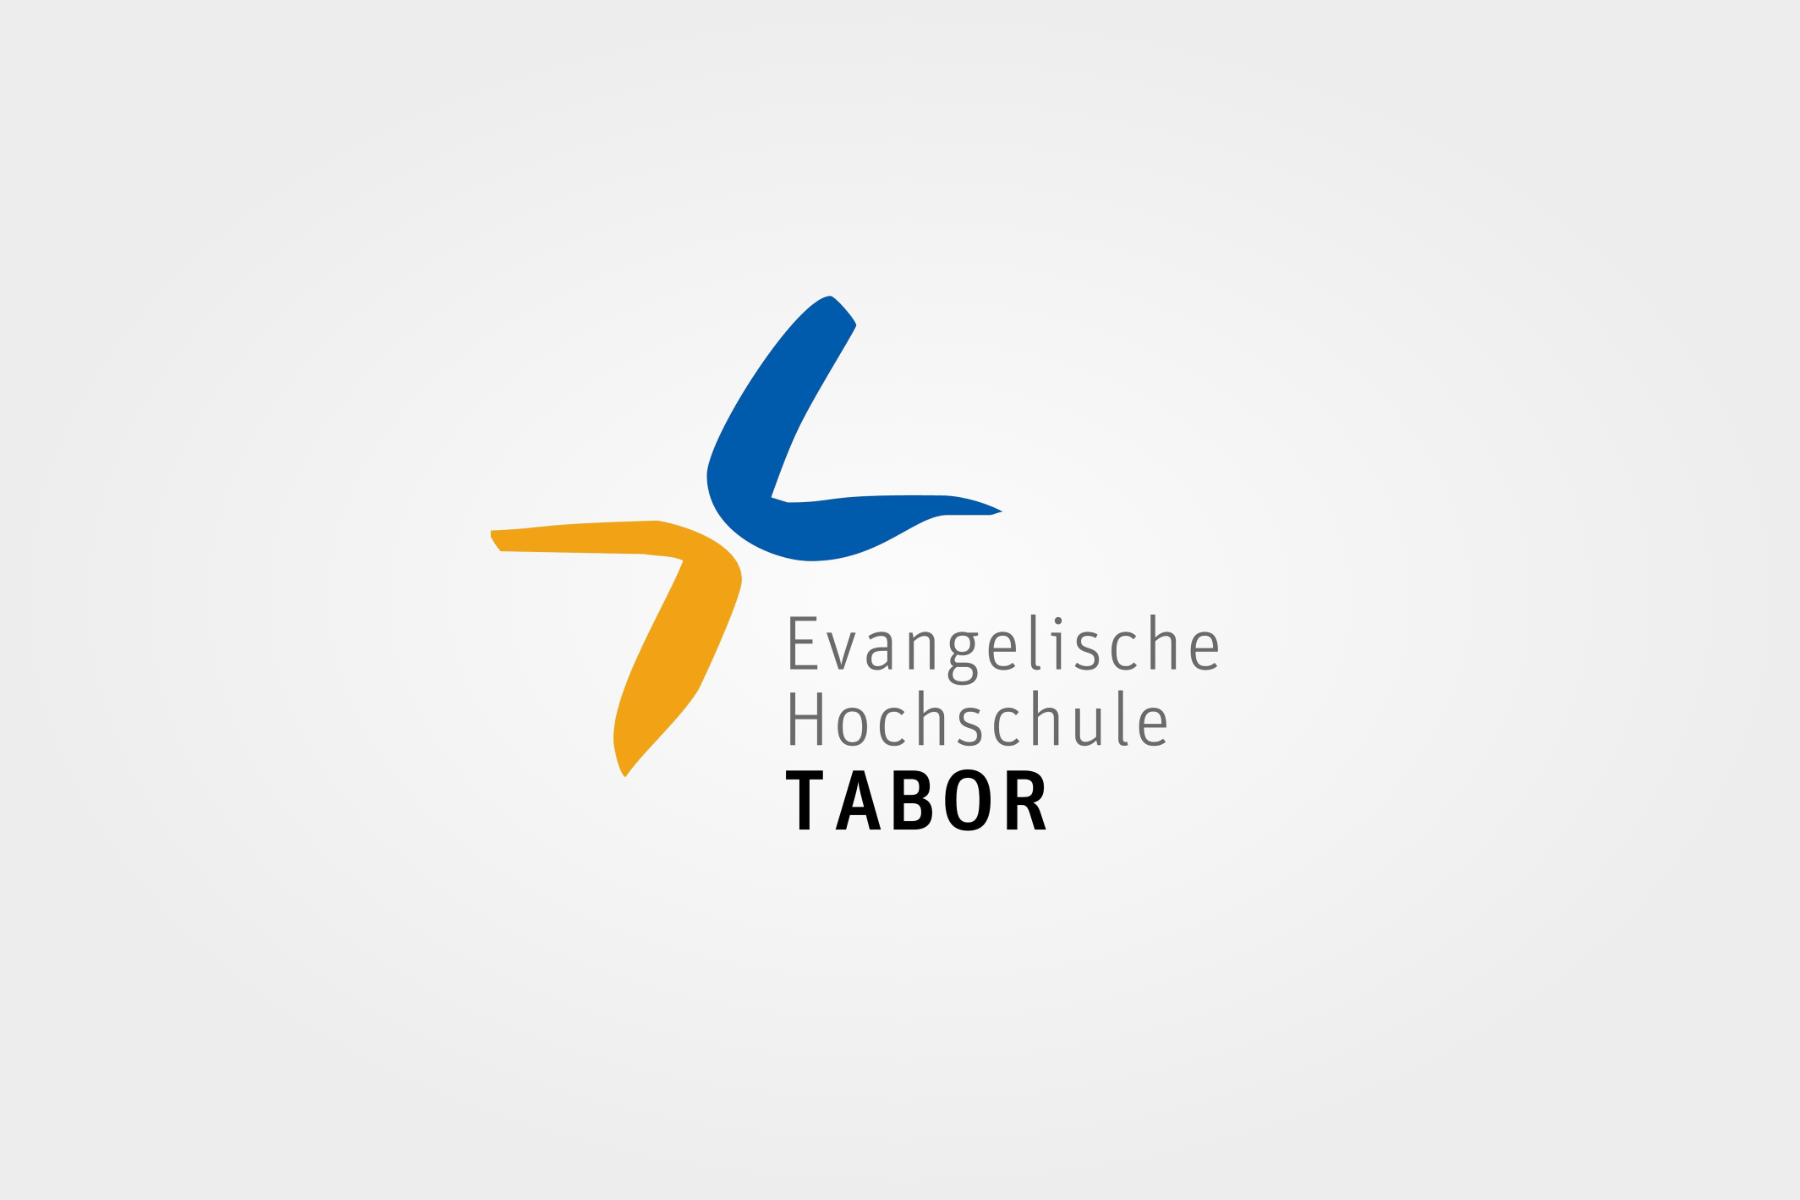 Protestant University of Tabor